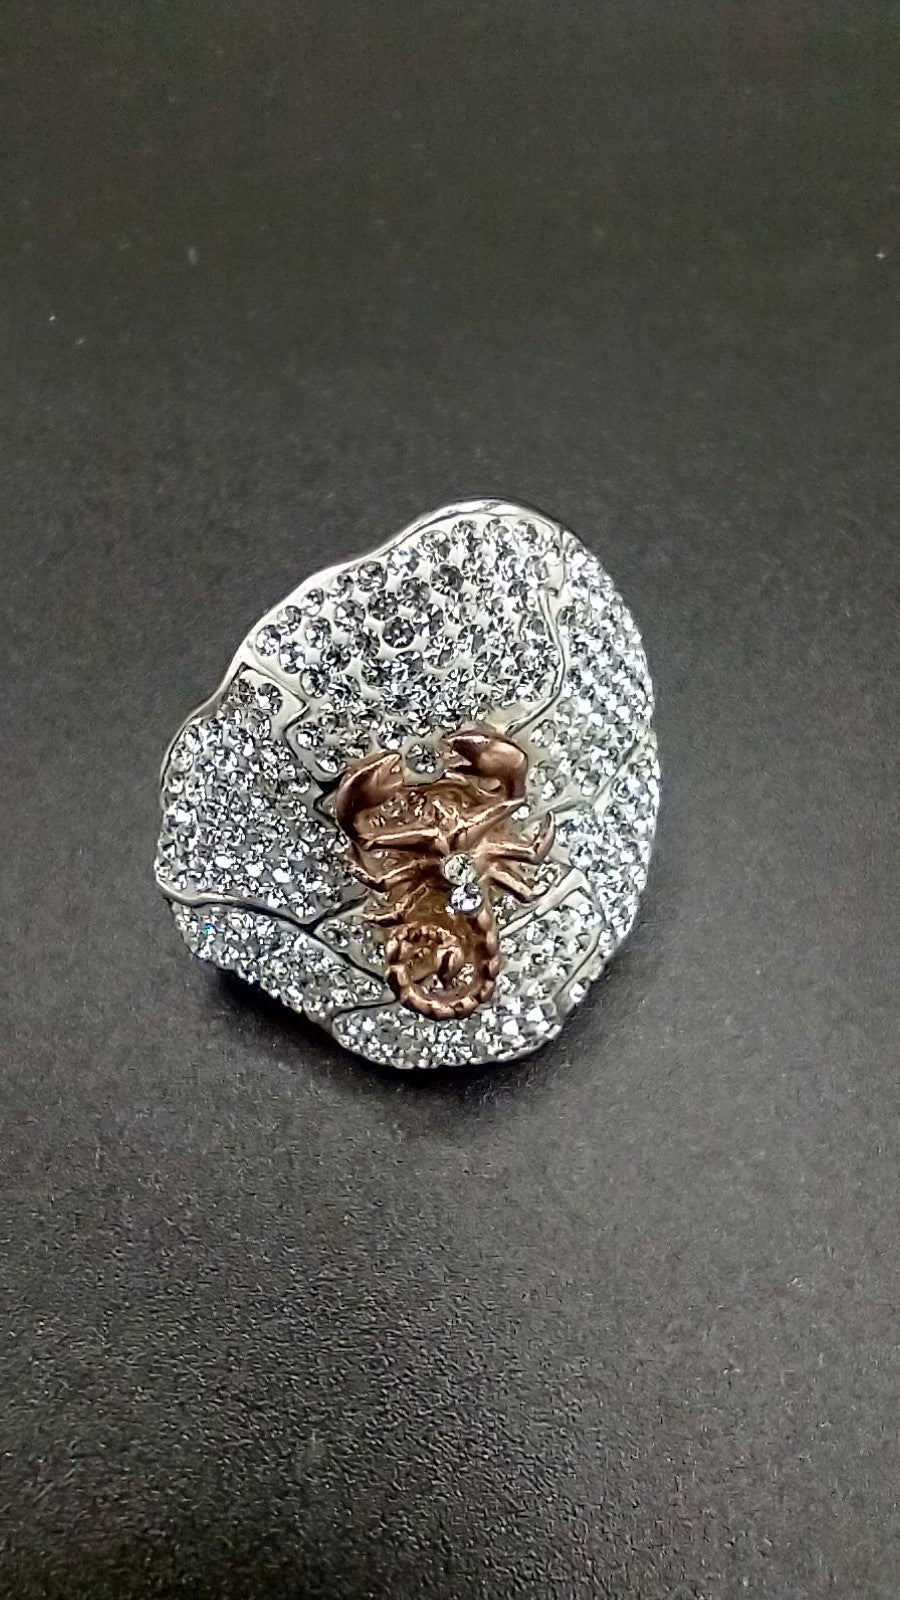 "SCORPION ON WHITE SAND" White sapphire on 925 sterling silver ring size 9...$130.